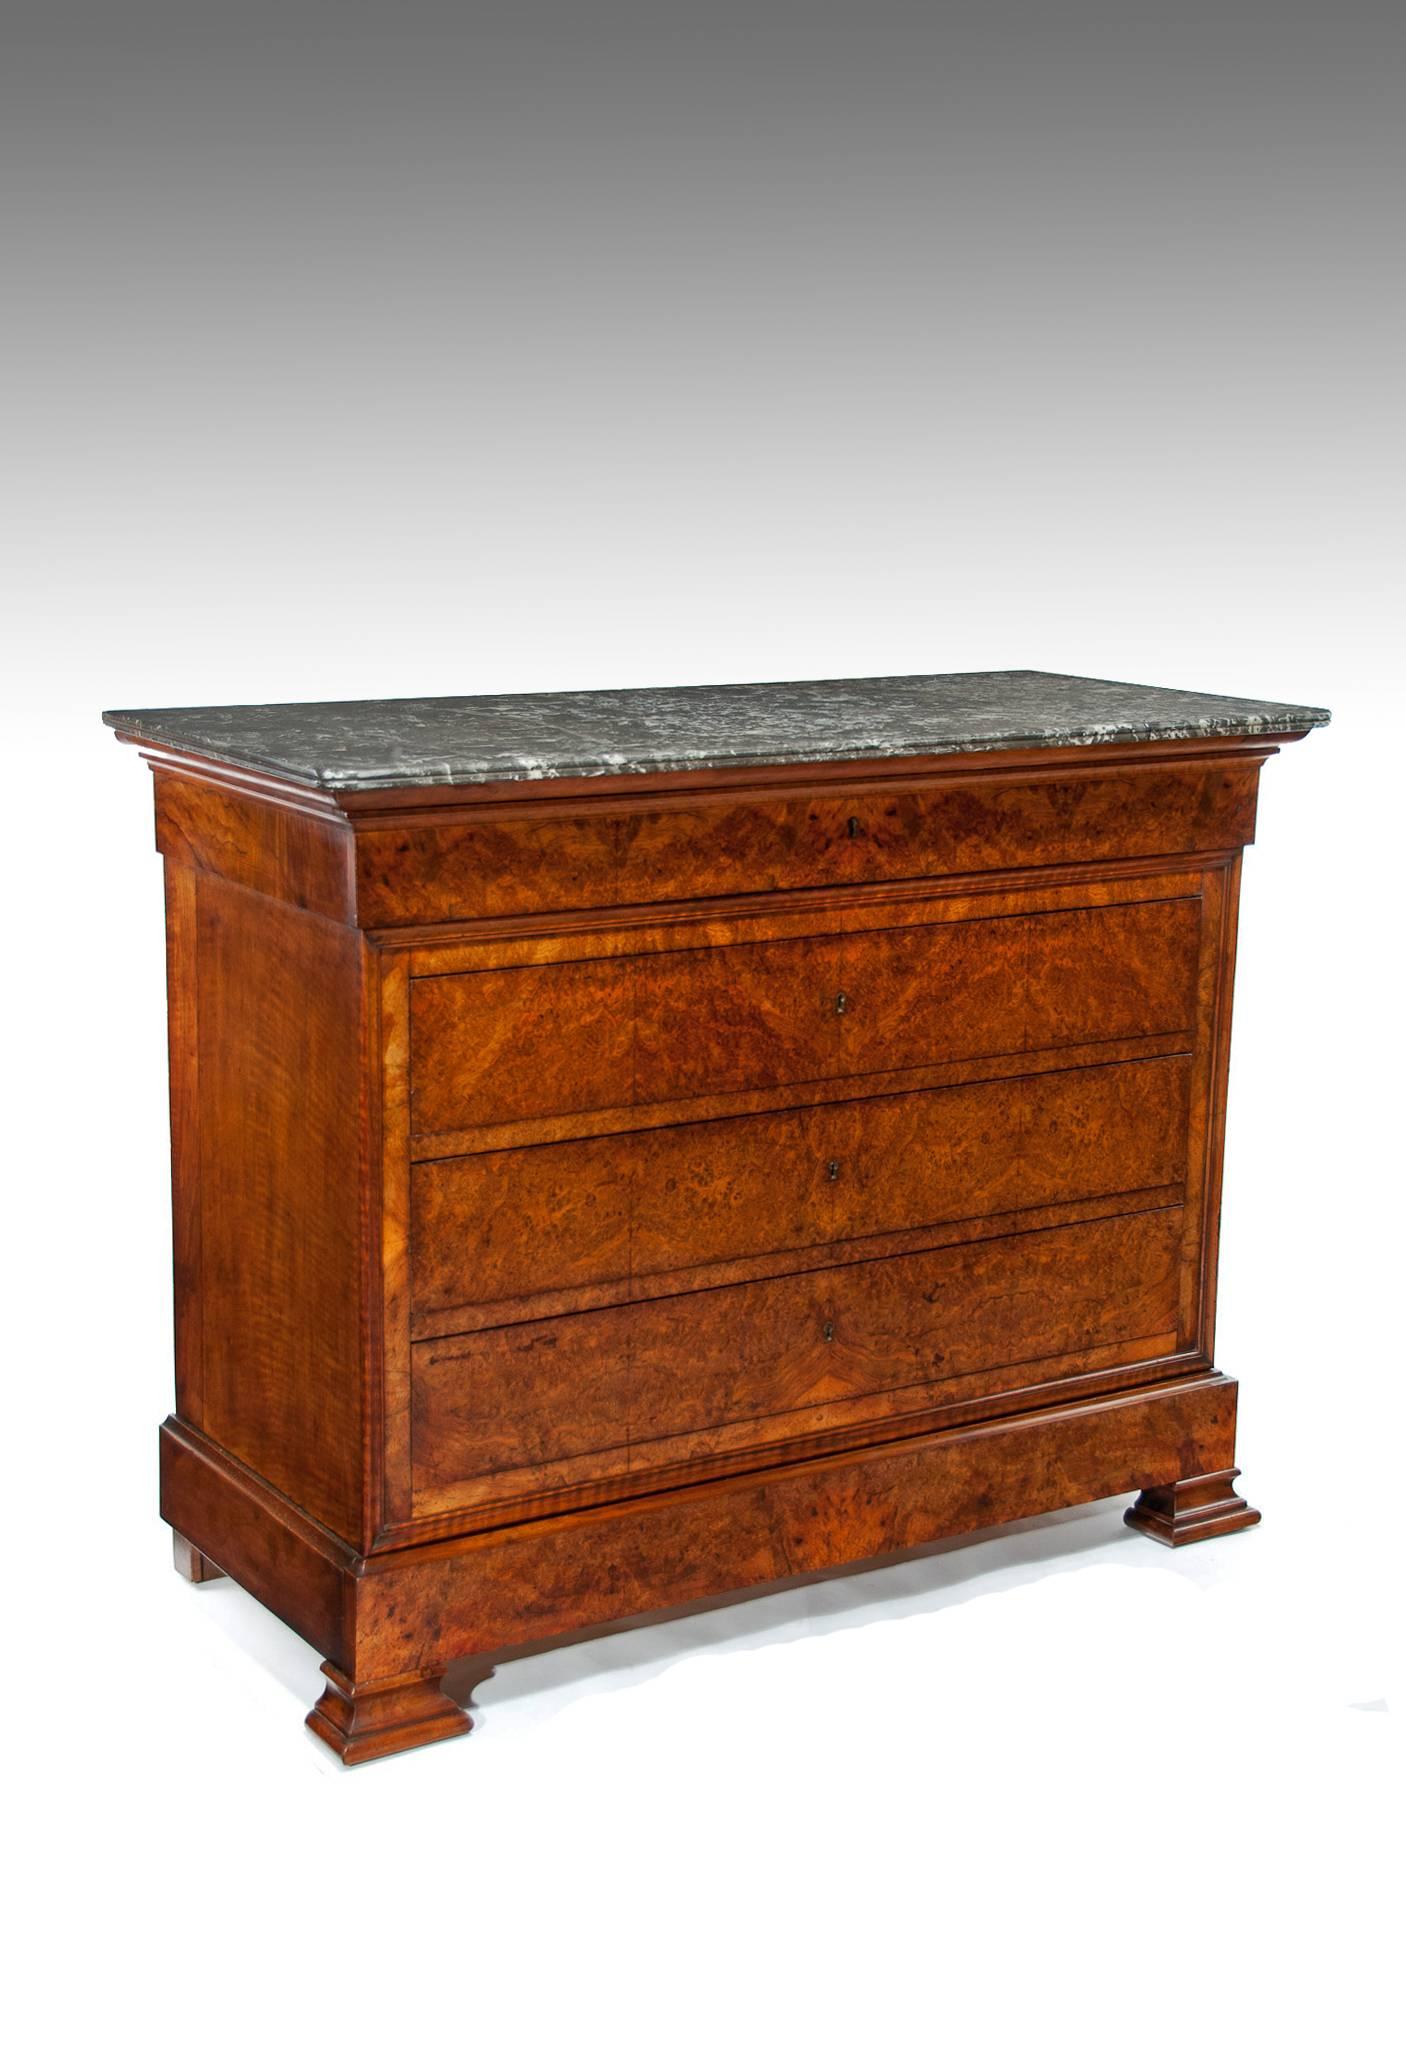 An exceptional quality “Gris St Anne” marble topped French Louis Philippe burr Walnut five drawer commode. 
This antique commode has a beautifully figured grey marble top known as Gris St Anne with a double scrolled edge. 
Having the finest